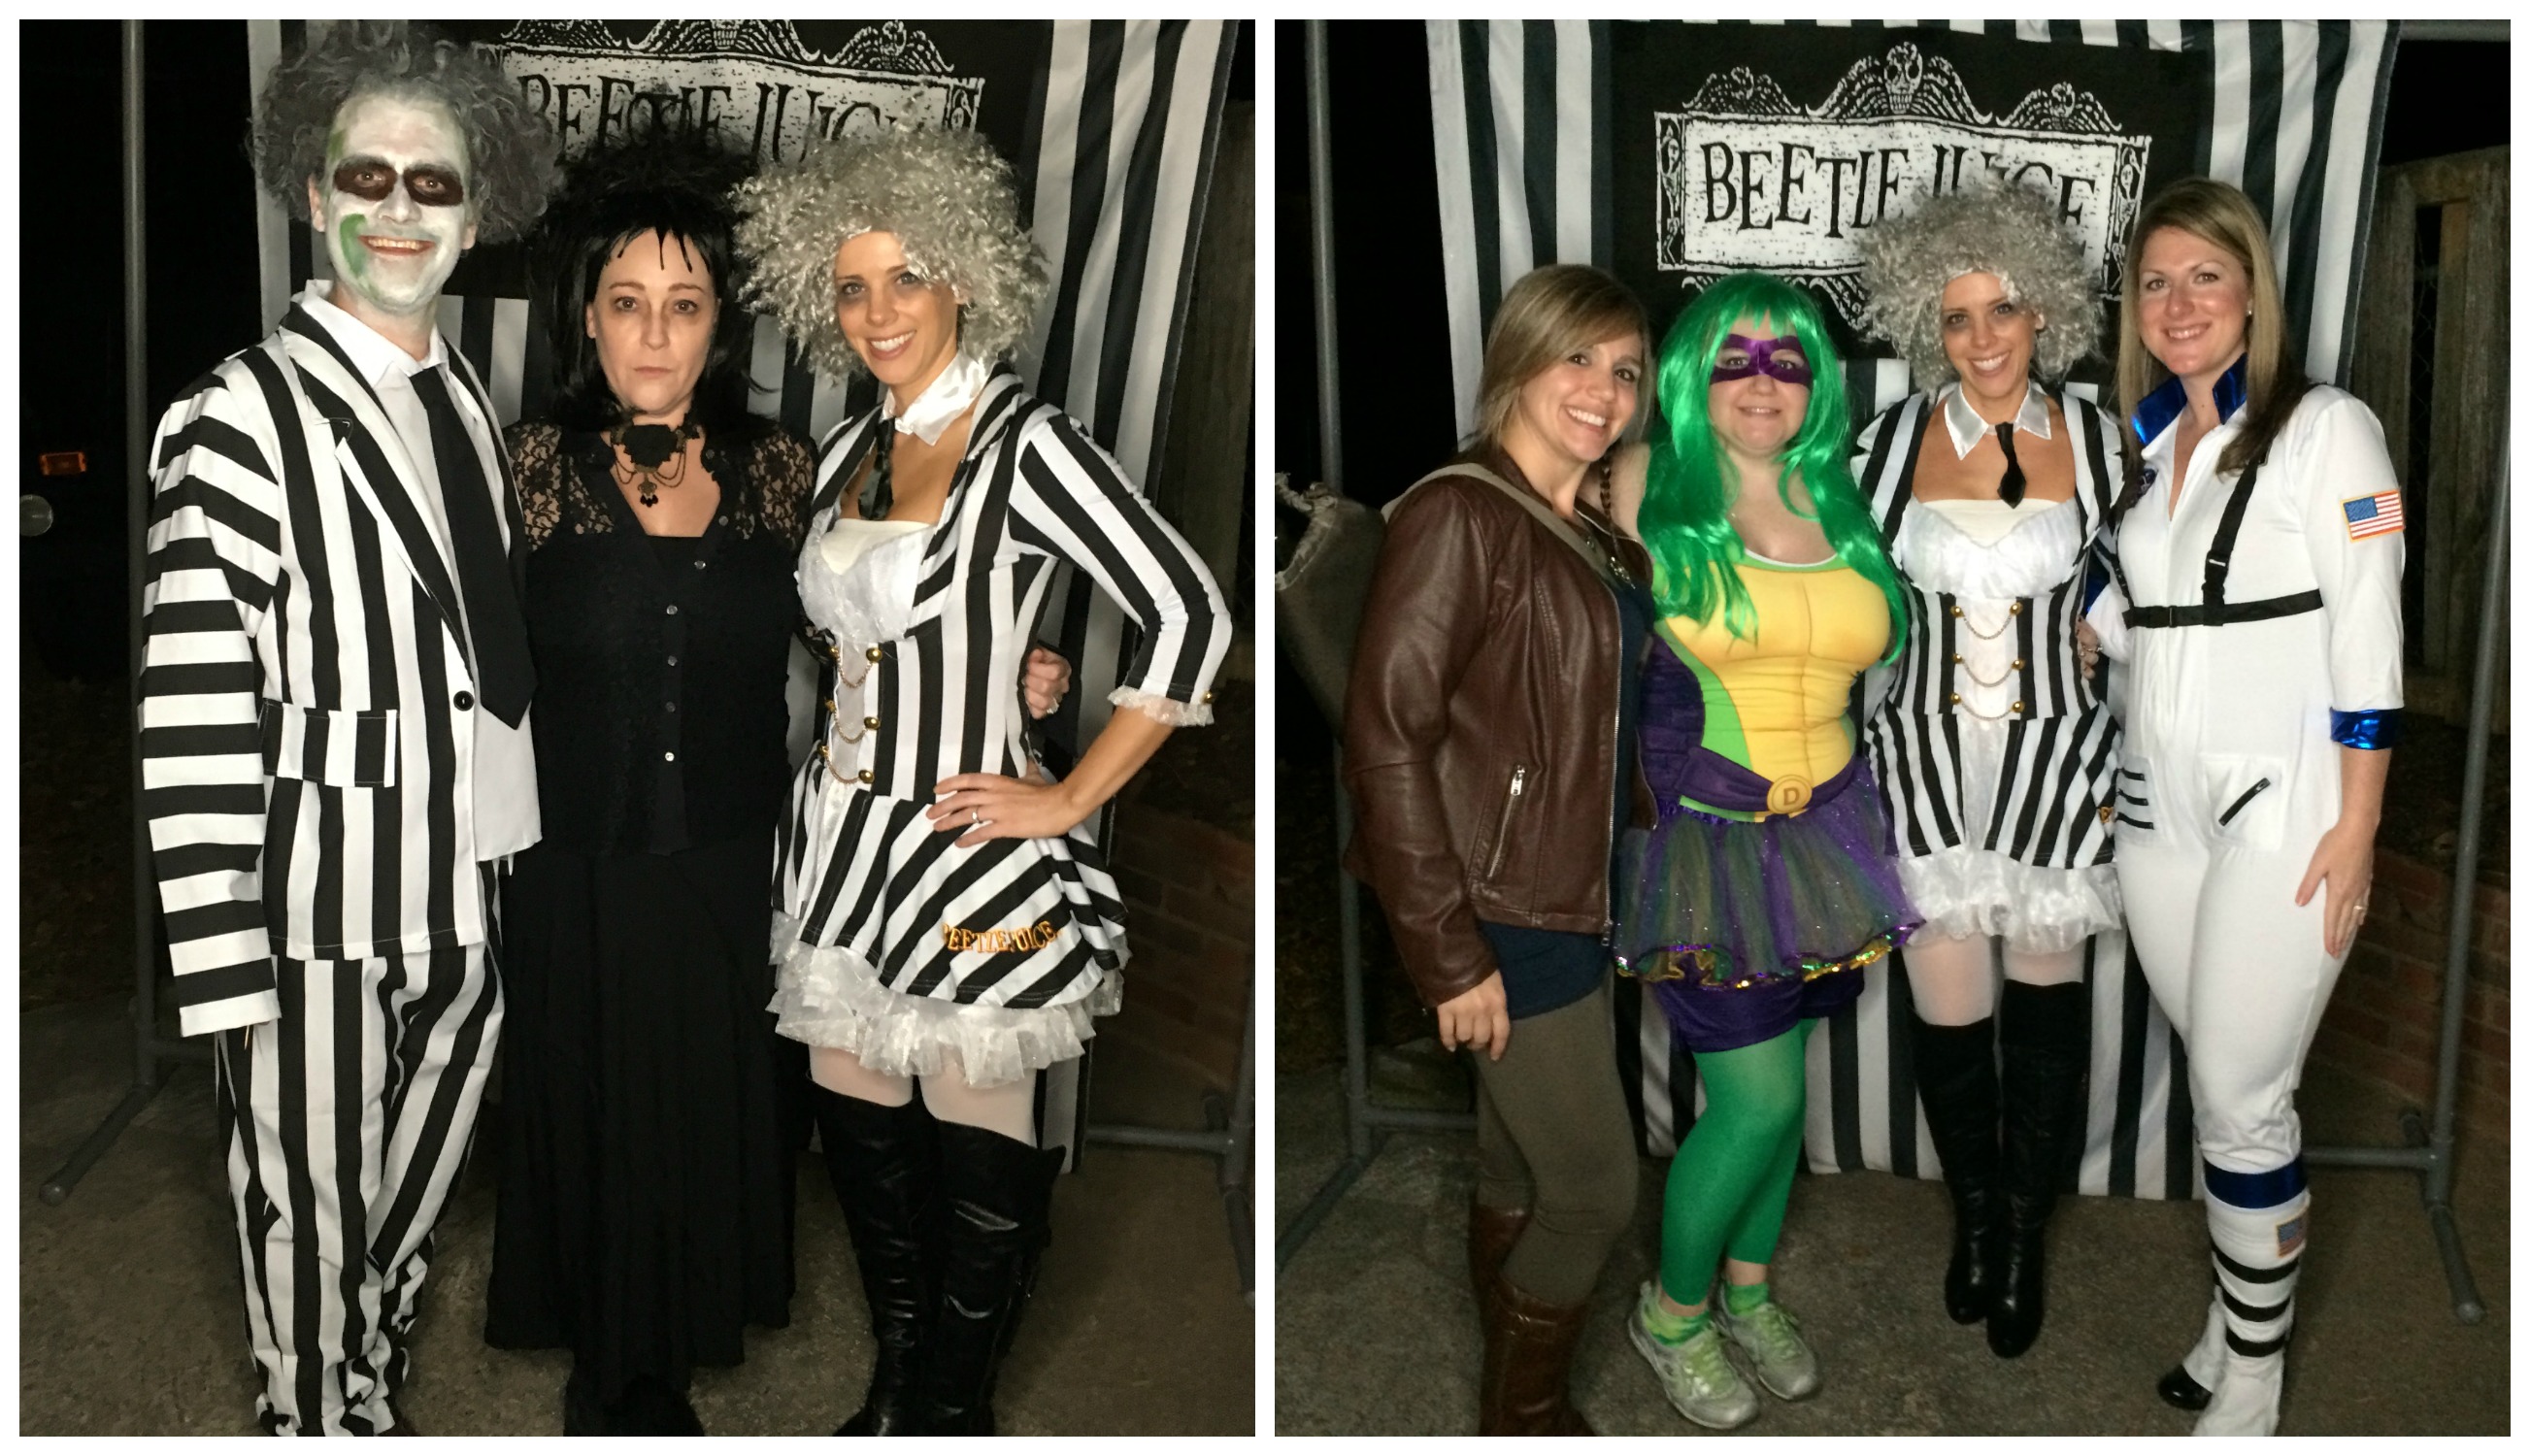 Beetlejuice Halloween Party - Guest Collage 1